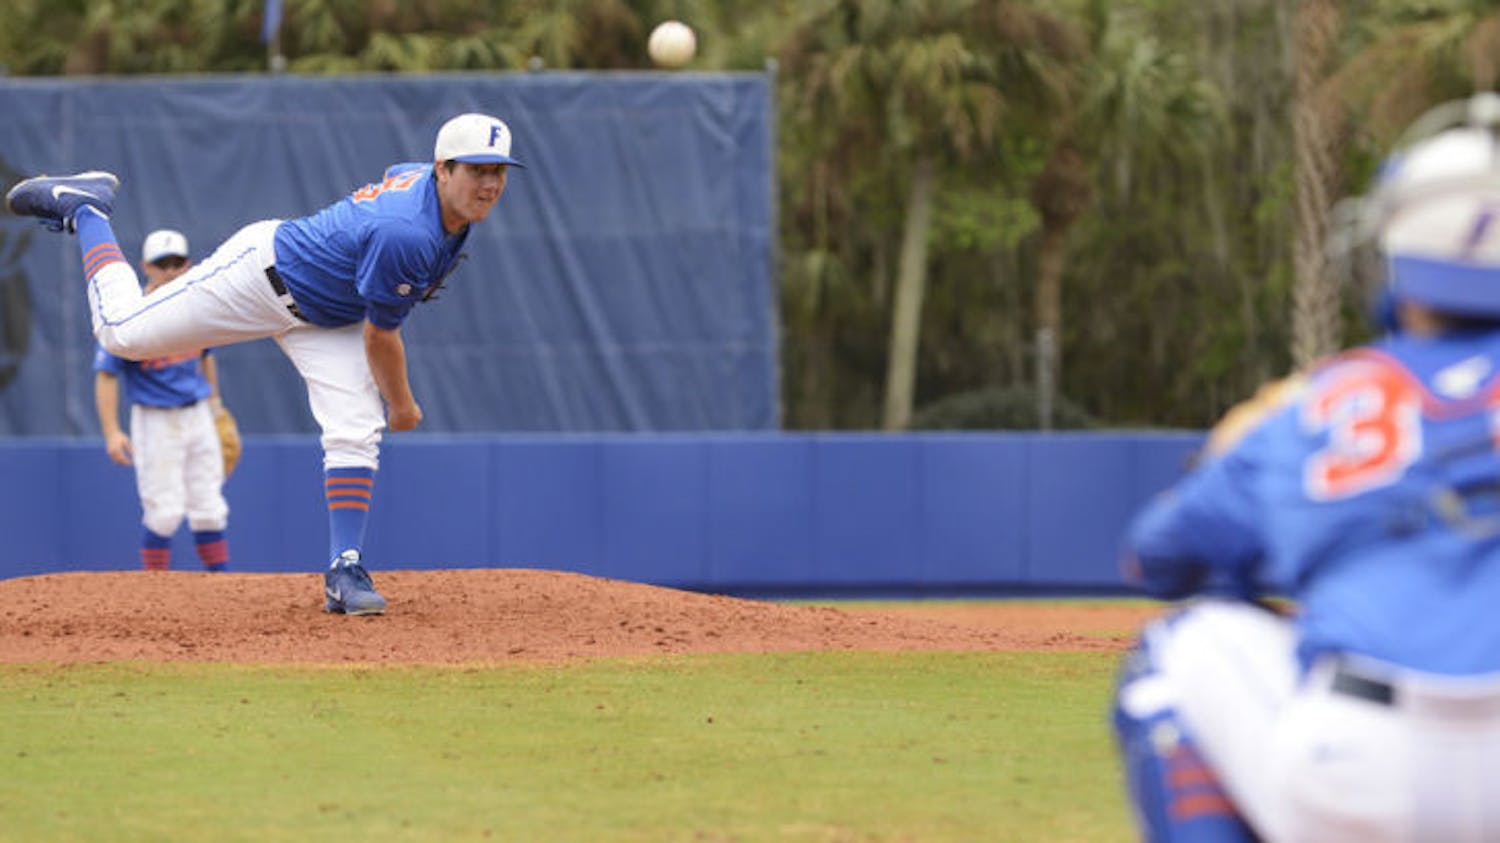 UF sophomore Johnny Magliozzi warms up against Florida Gulf Coast University on February 24. Magliozzi may start on Saturday or pitch out of bullpen in Florida’s weekend series against Georgia.